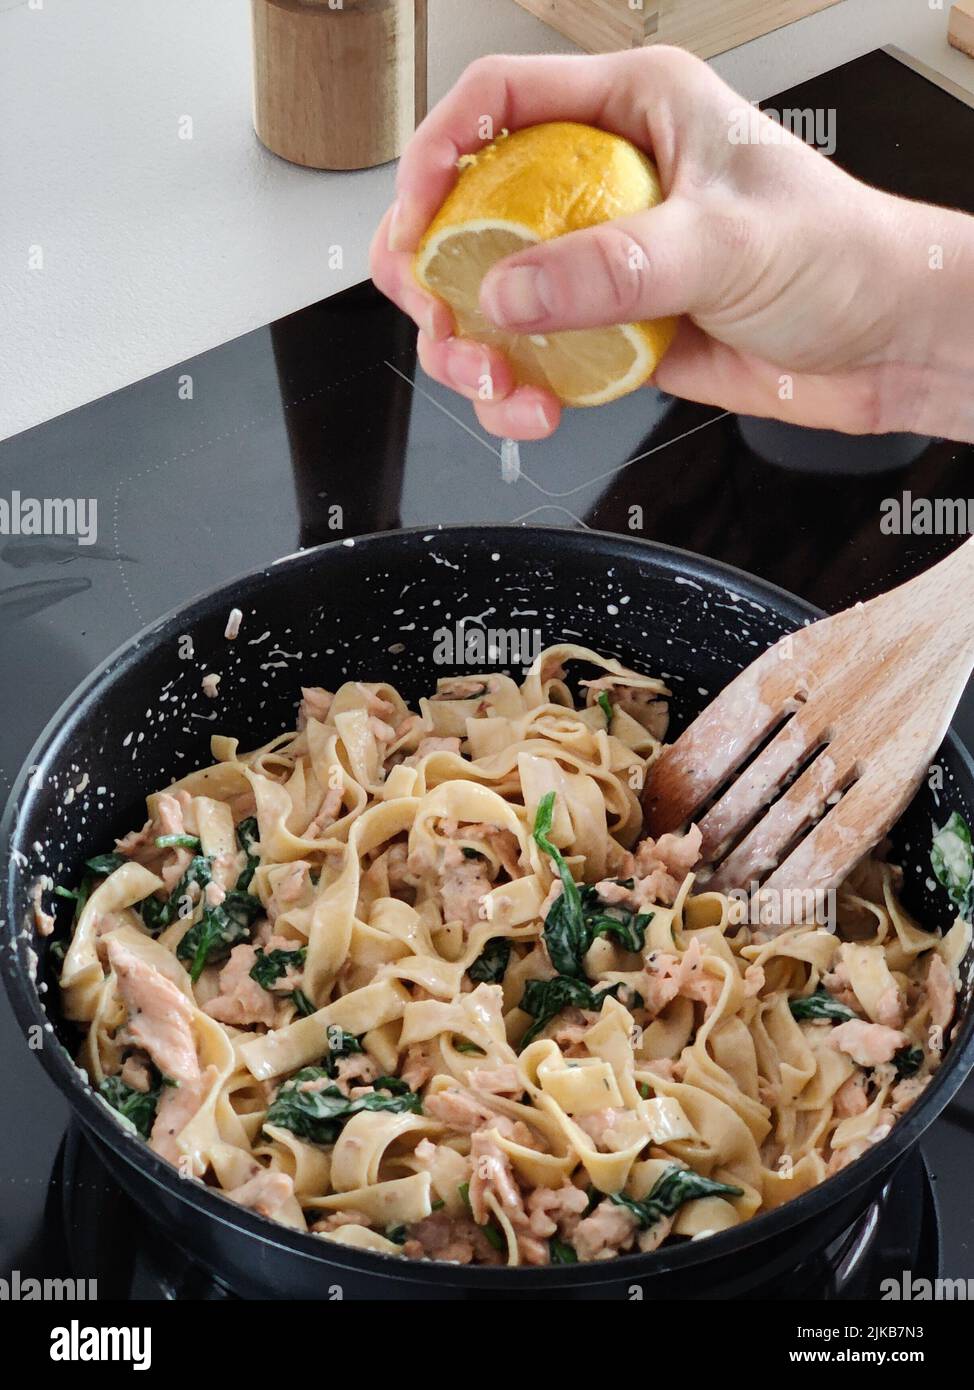 Woman squeeze a lemon on tasty home made seafood pasta in home kitchen, Closeup shot Stock Photo